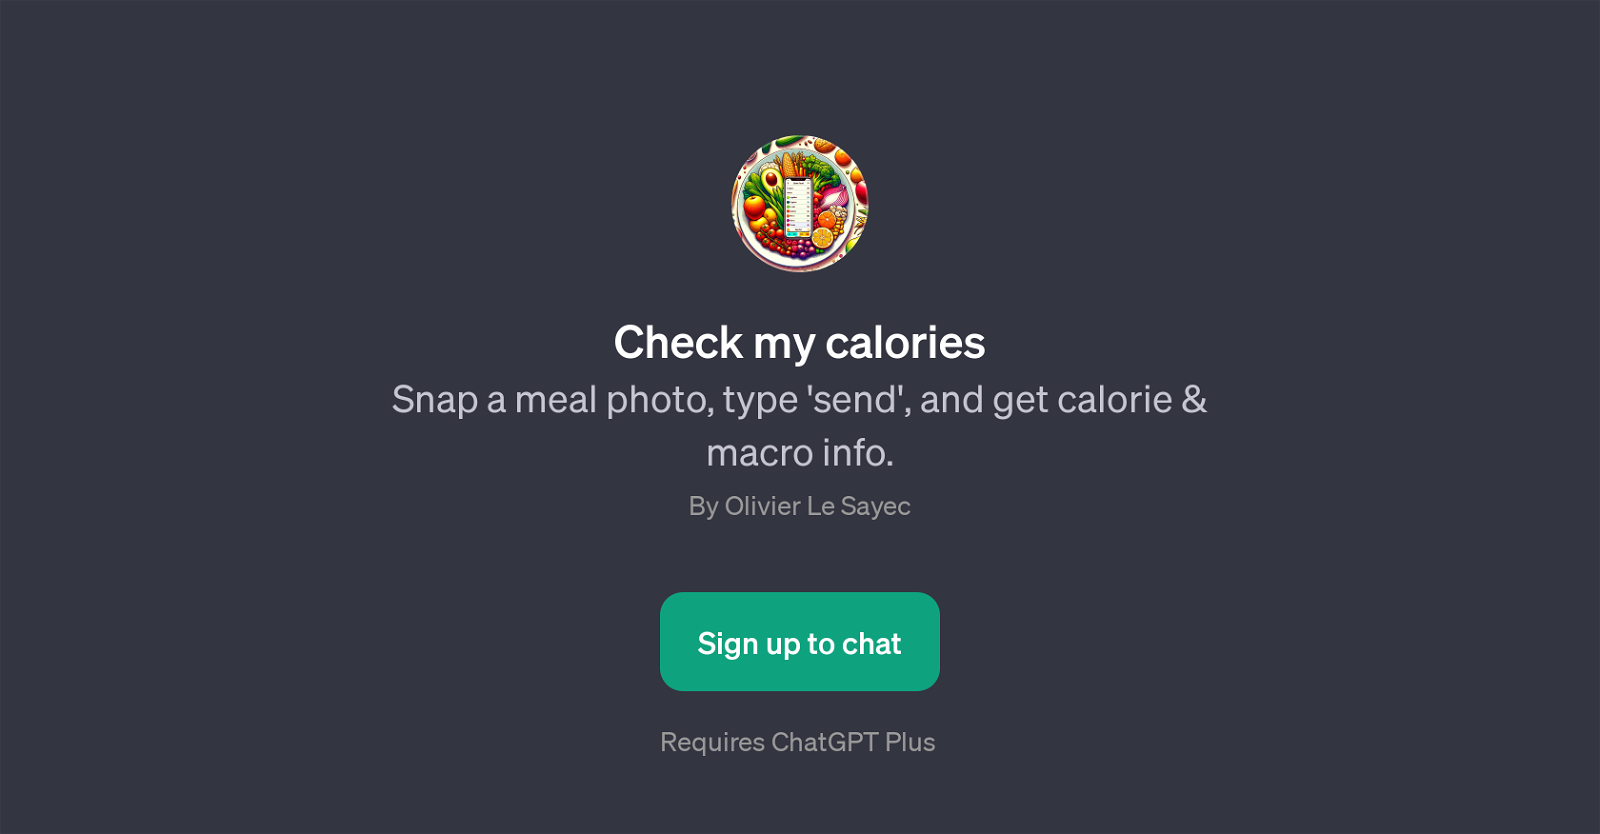 Check my calories website